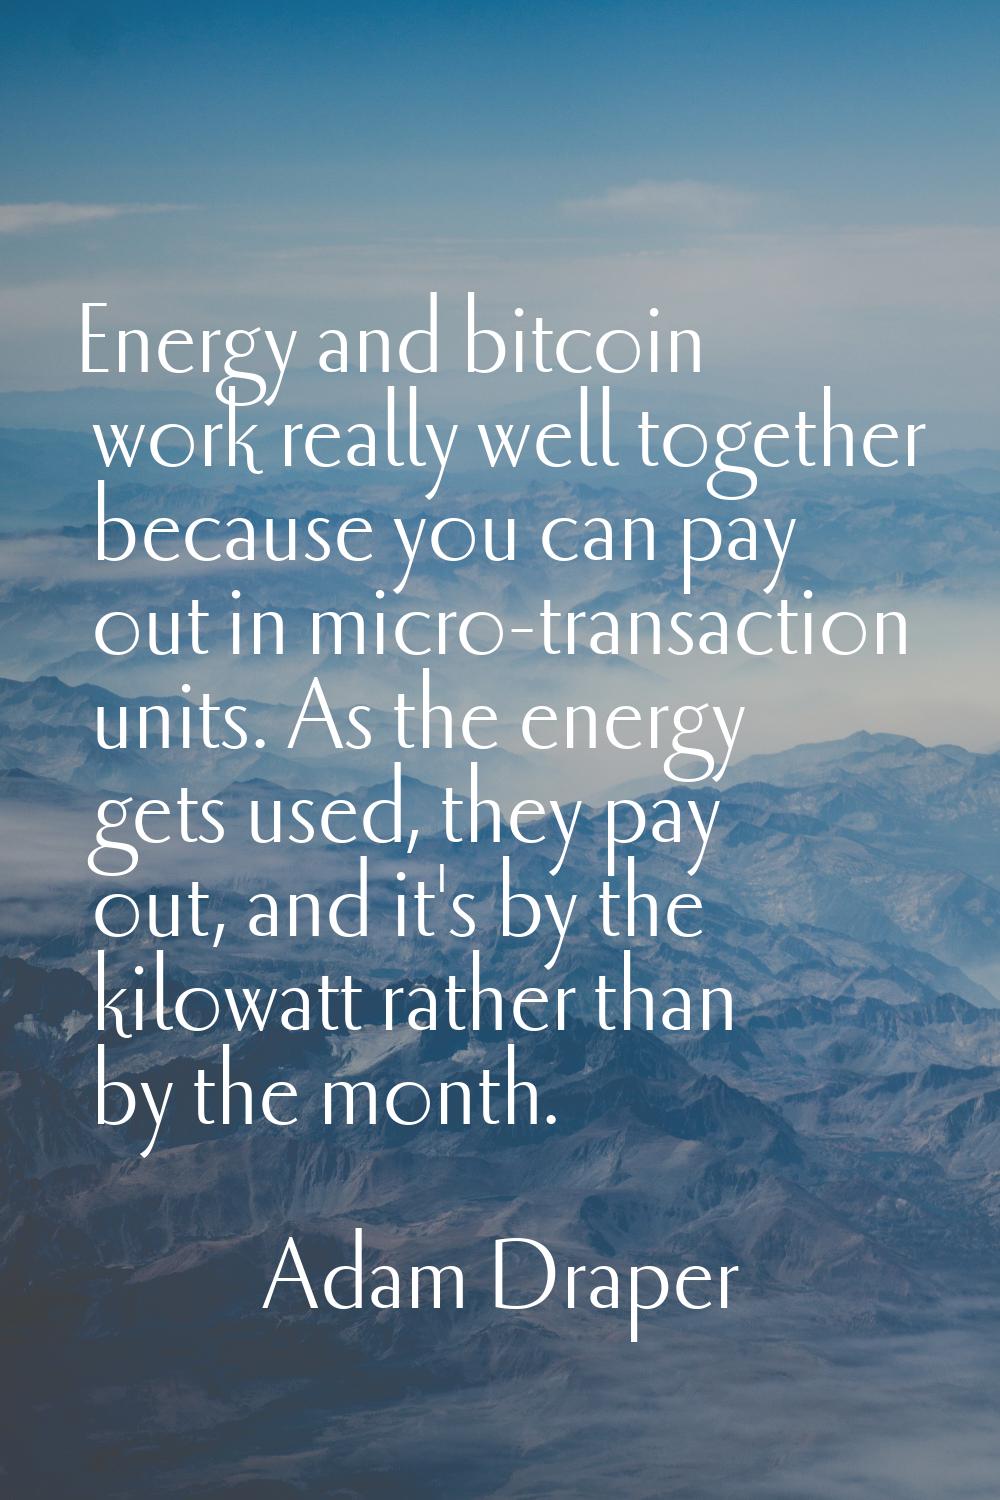 Energy and bitcoin work really well together because you can pay out in micro-transaction units. As